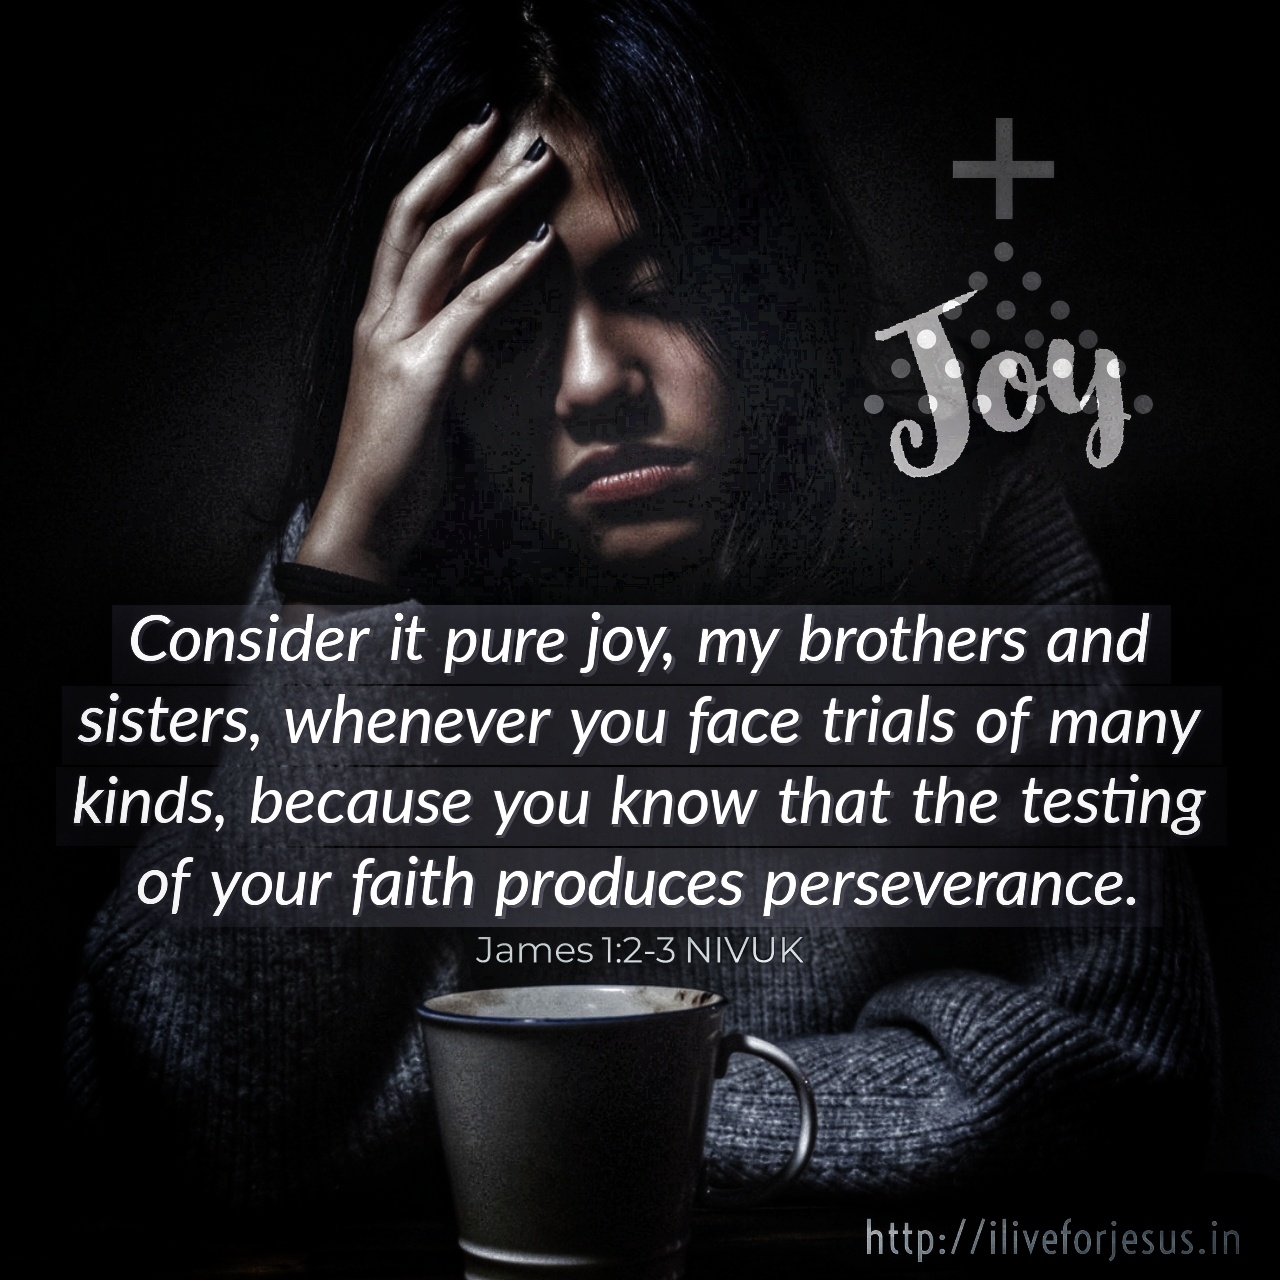 Consider it pure joy, my brothers and sisters, whenever you face trials of many kinds, because you know that the testing of your faith produces perseverance. James 1:2‭-‬3 NIVUK